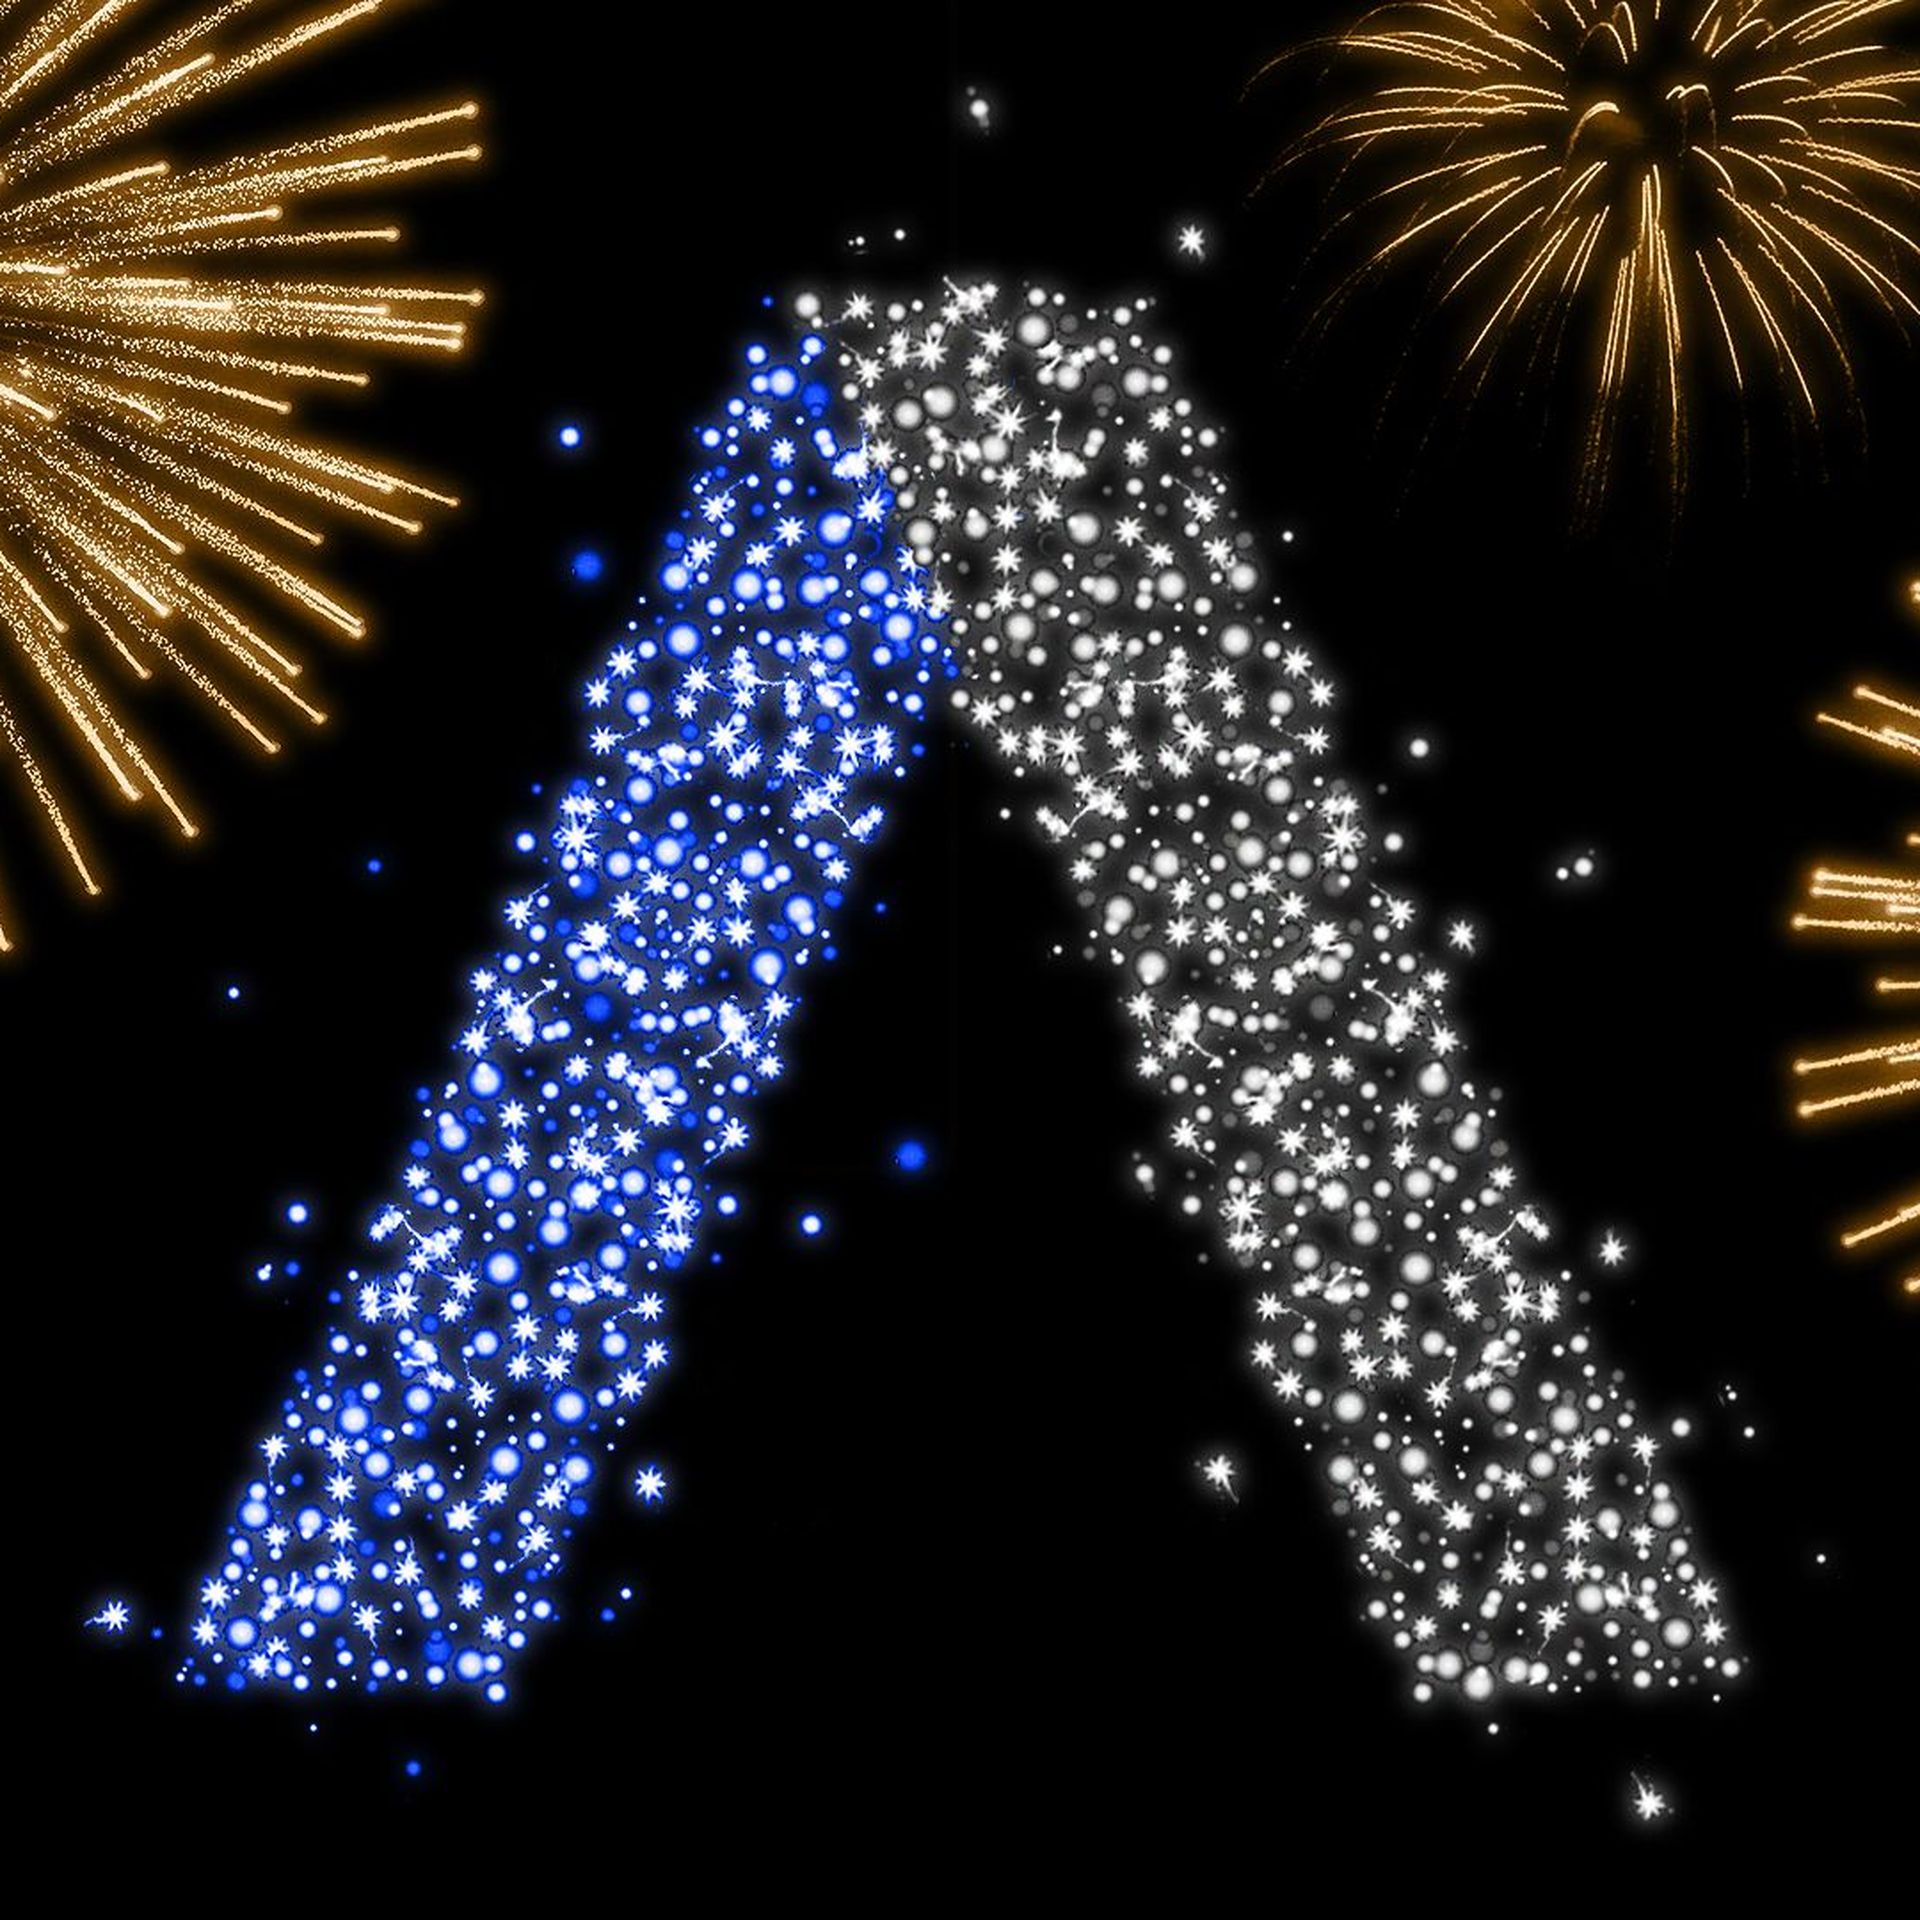 Illustration of the Axios "A" written in fireworks.